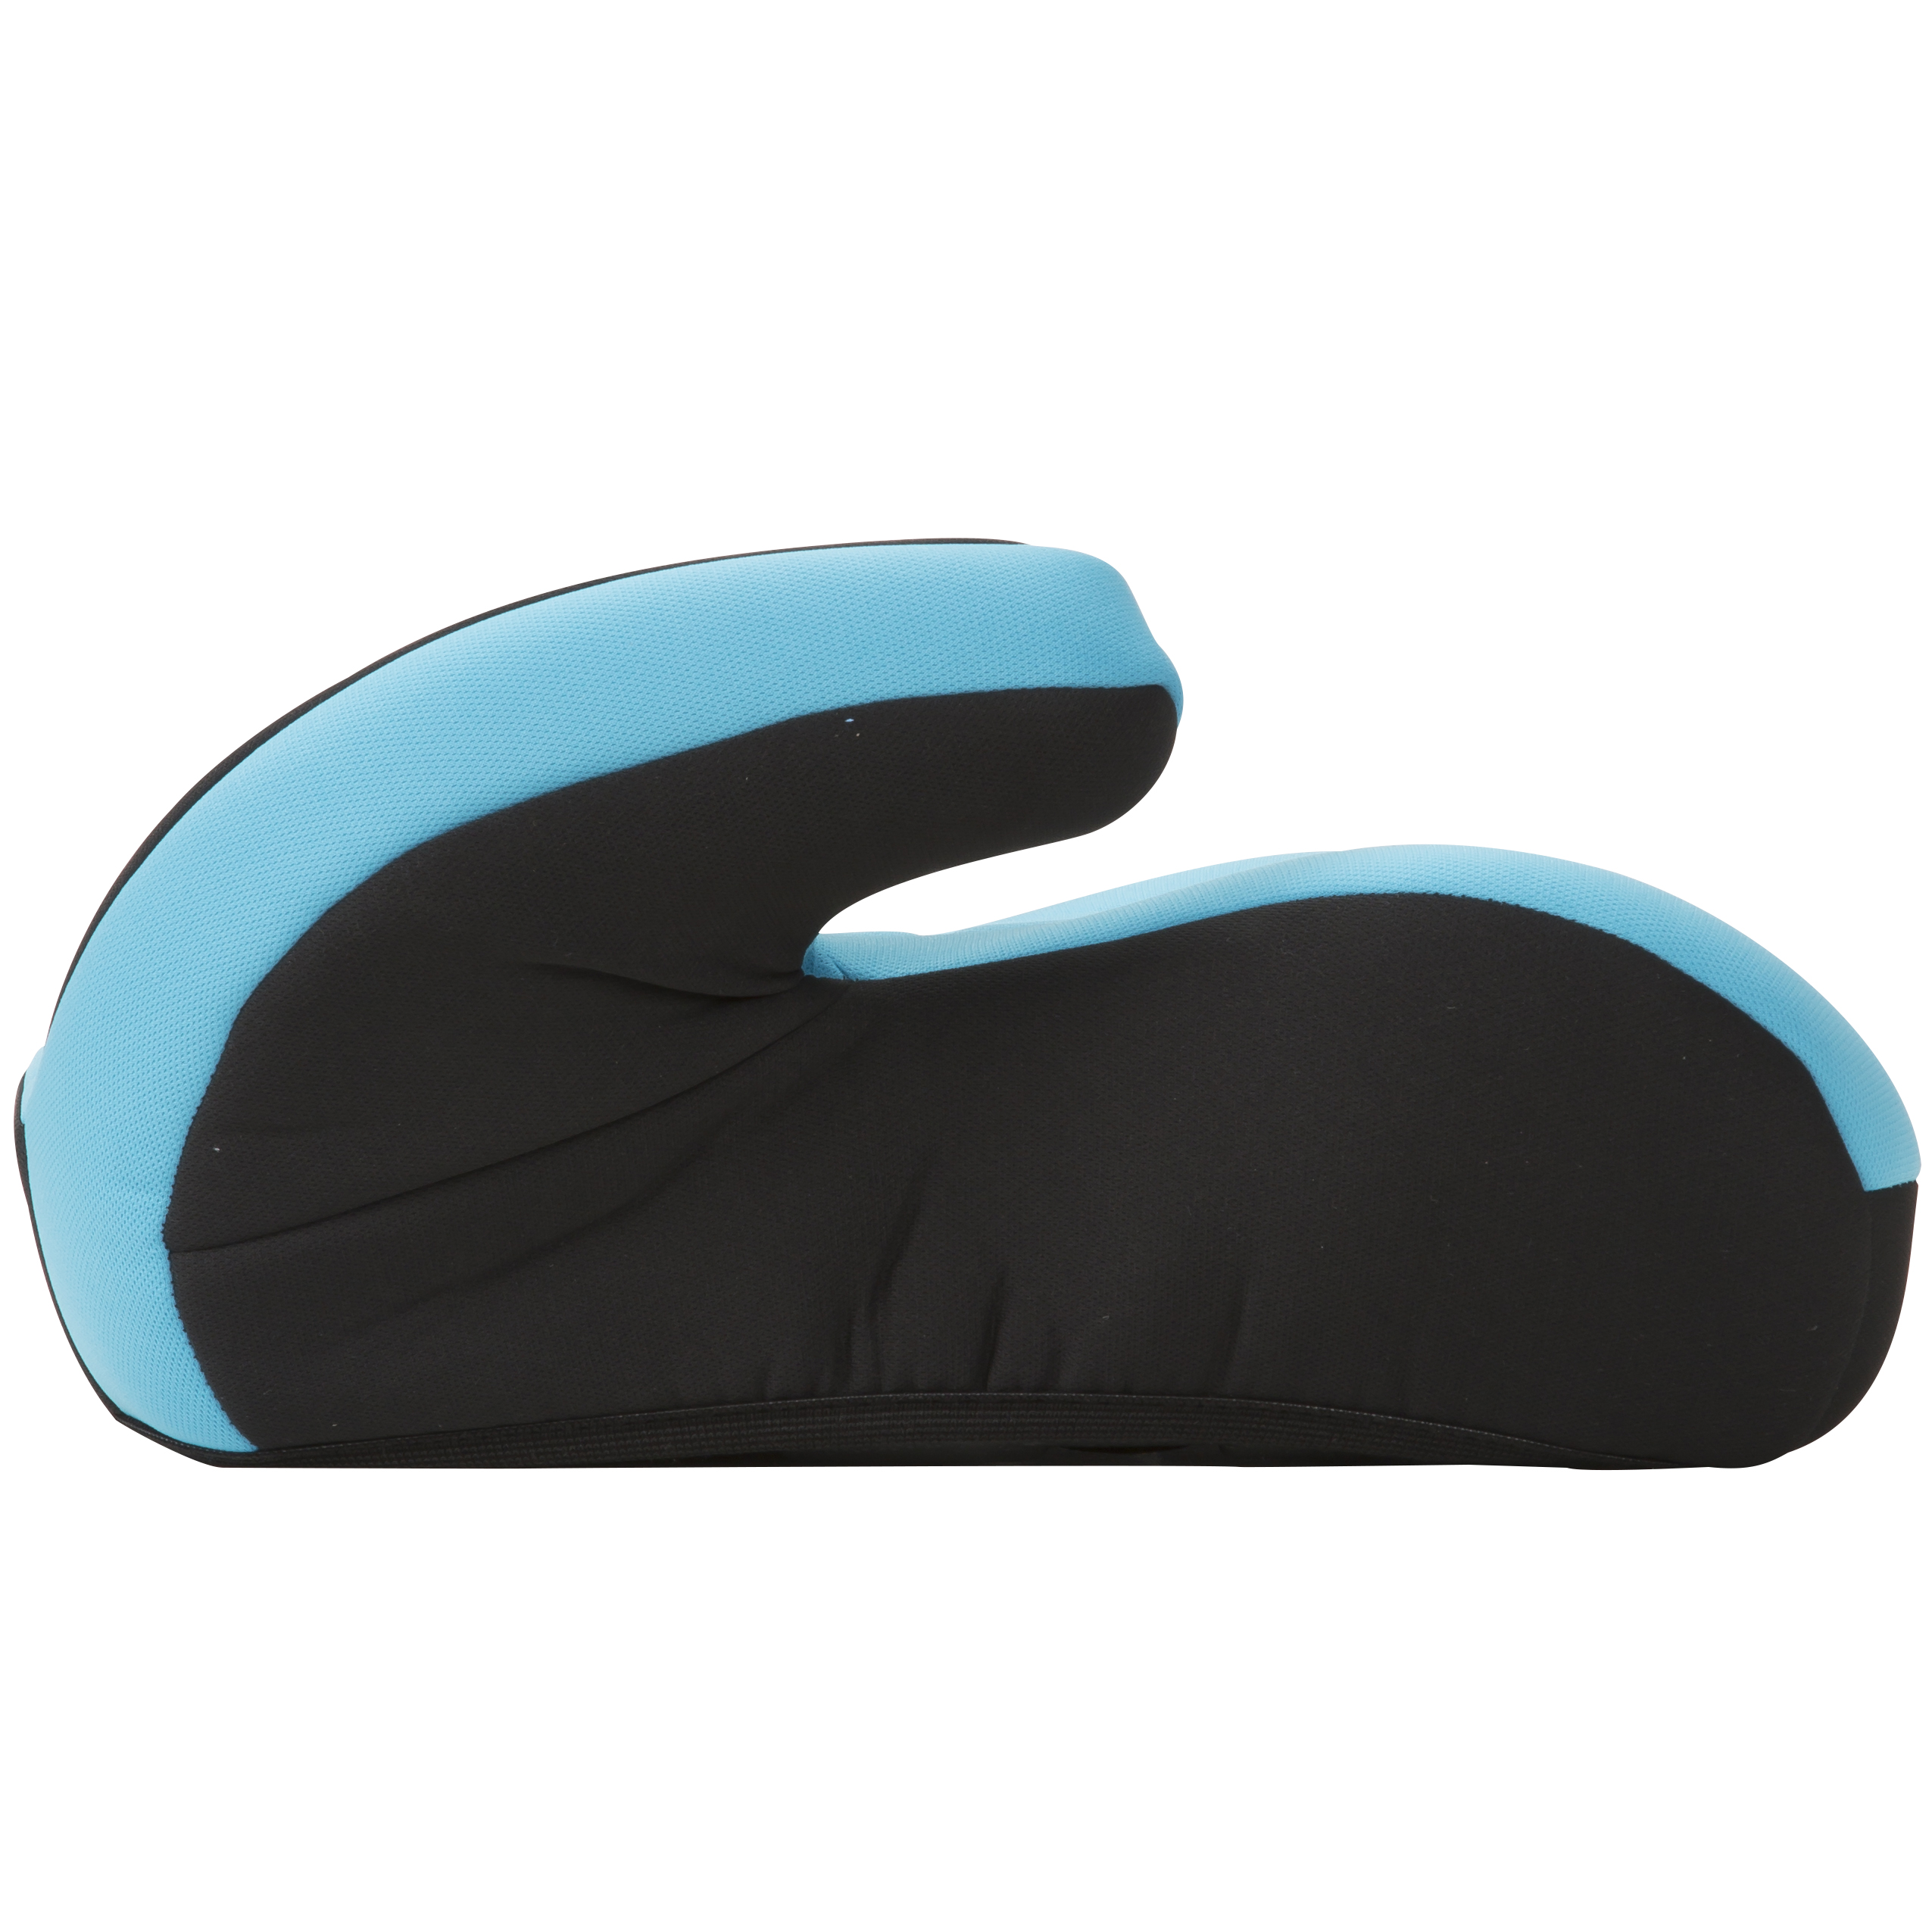 Cosco Topside Booster Car Seat, Turquoise - image 5 of 5